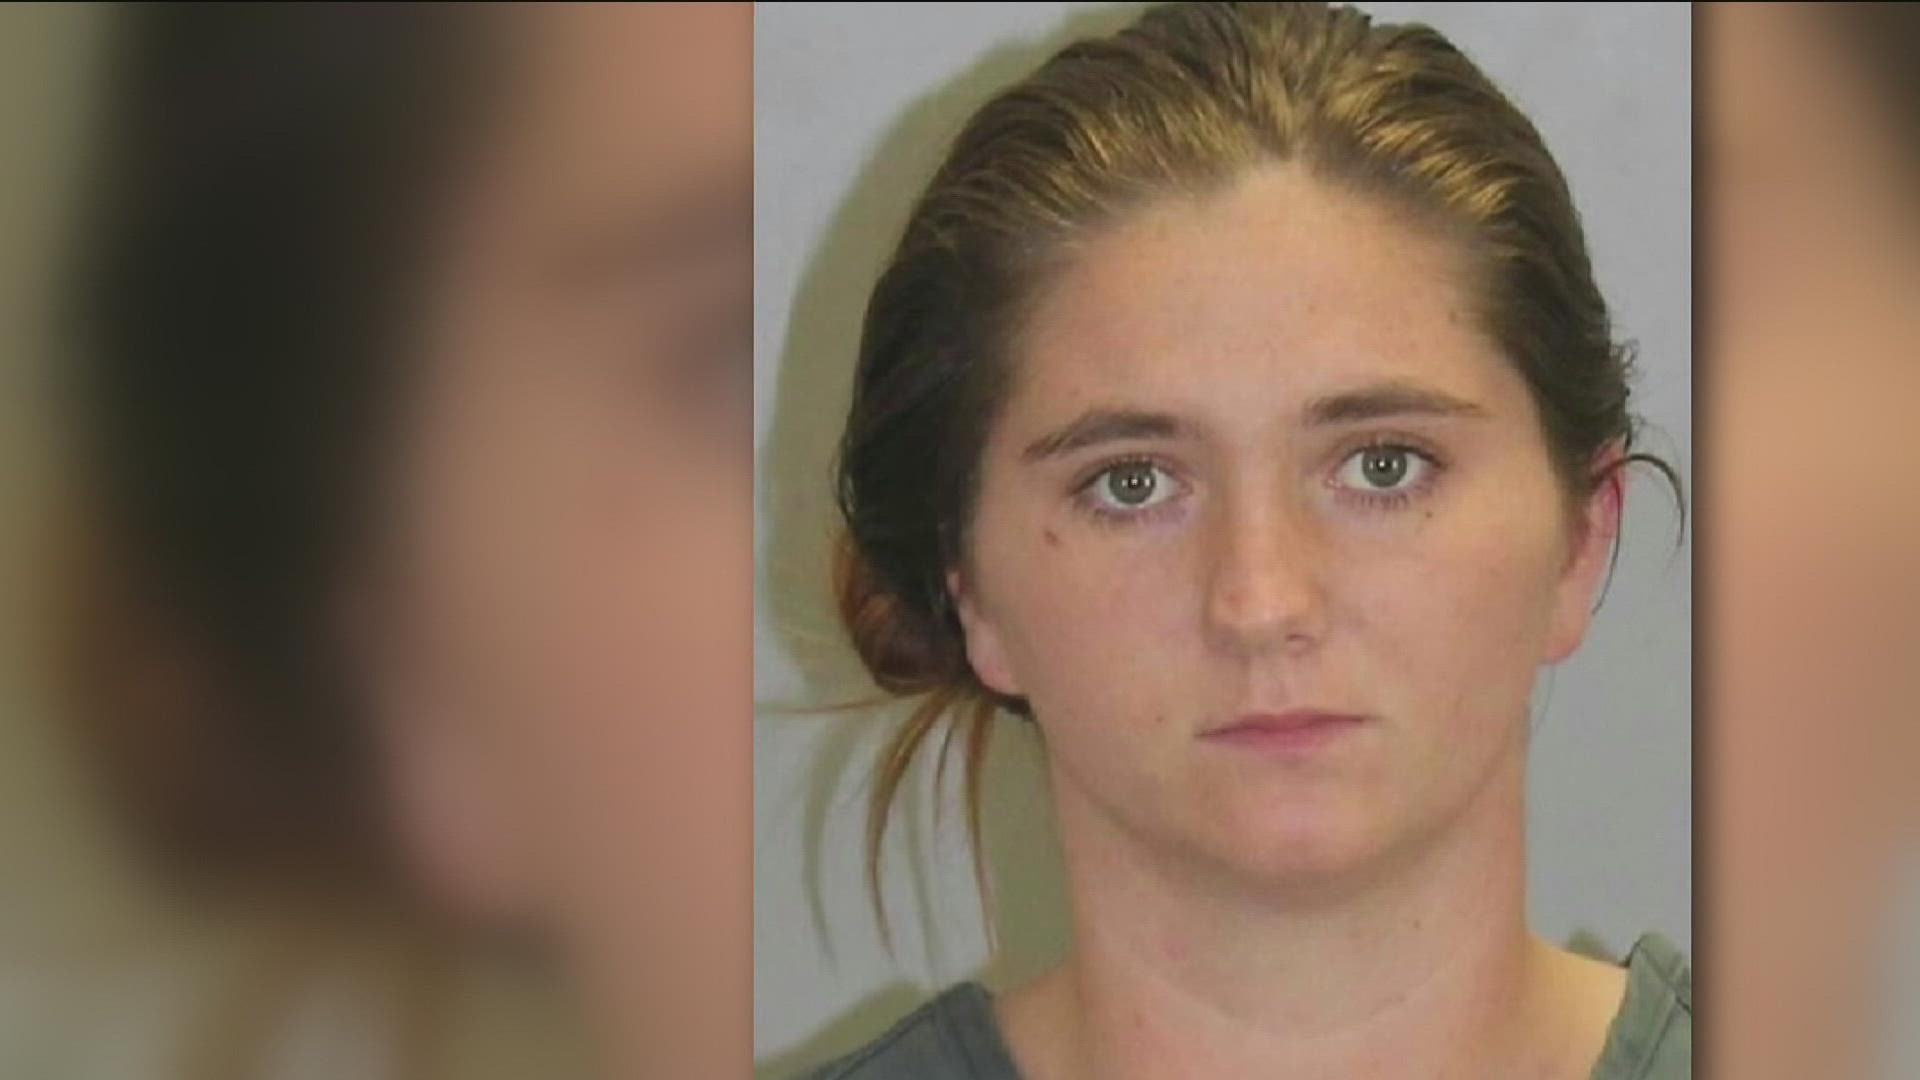 The now 24-year-old Hannah Payne was accused and charged for murdering Kenneth Herring in the 2019 incident.